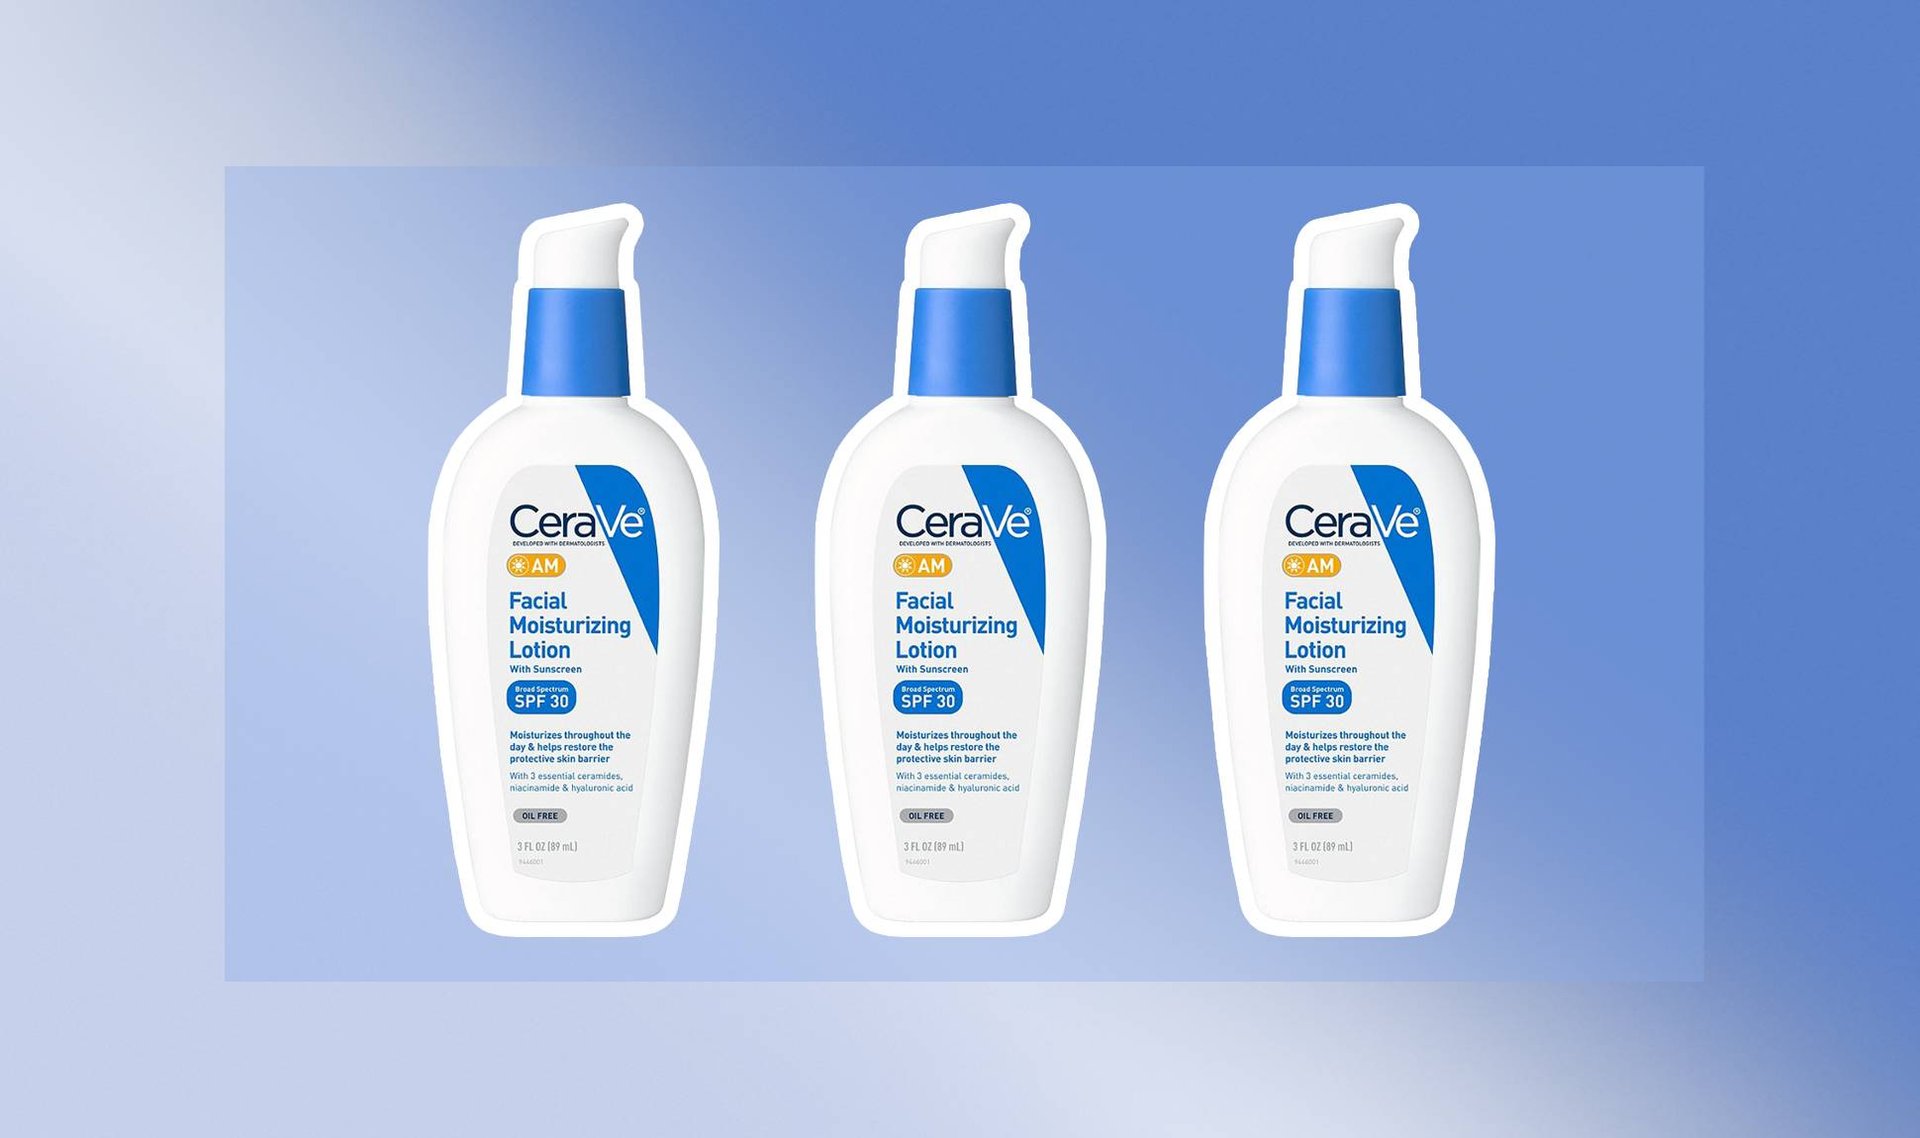 How the CeraVe AM Facial Moisturizing Lotion Transformed One Editor’s Summer Skincare Routine